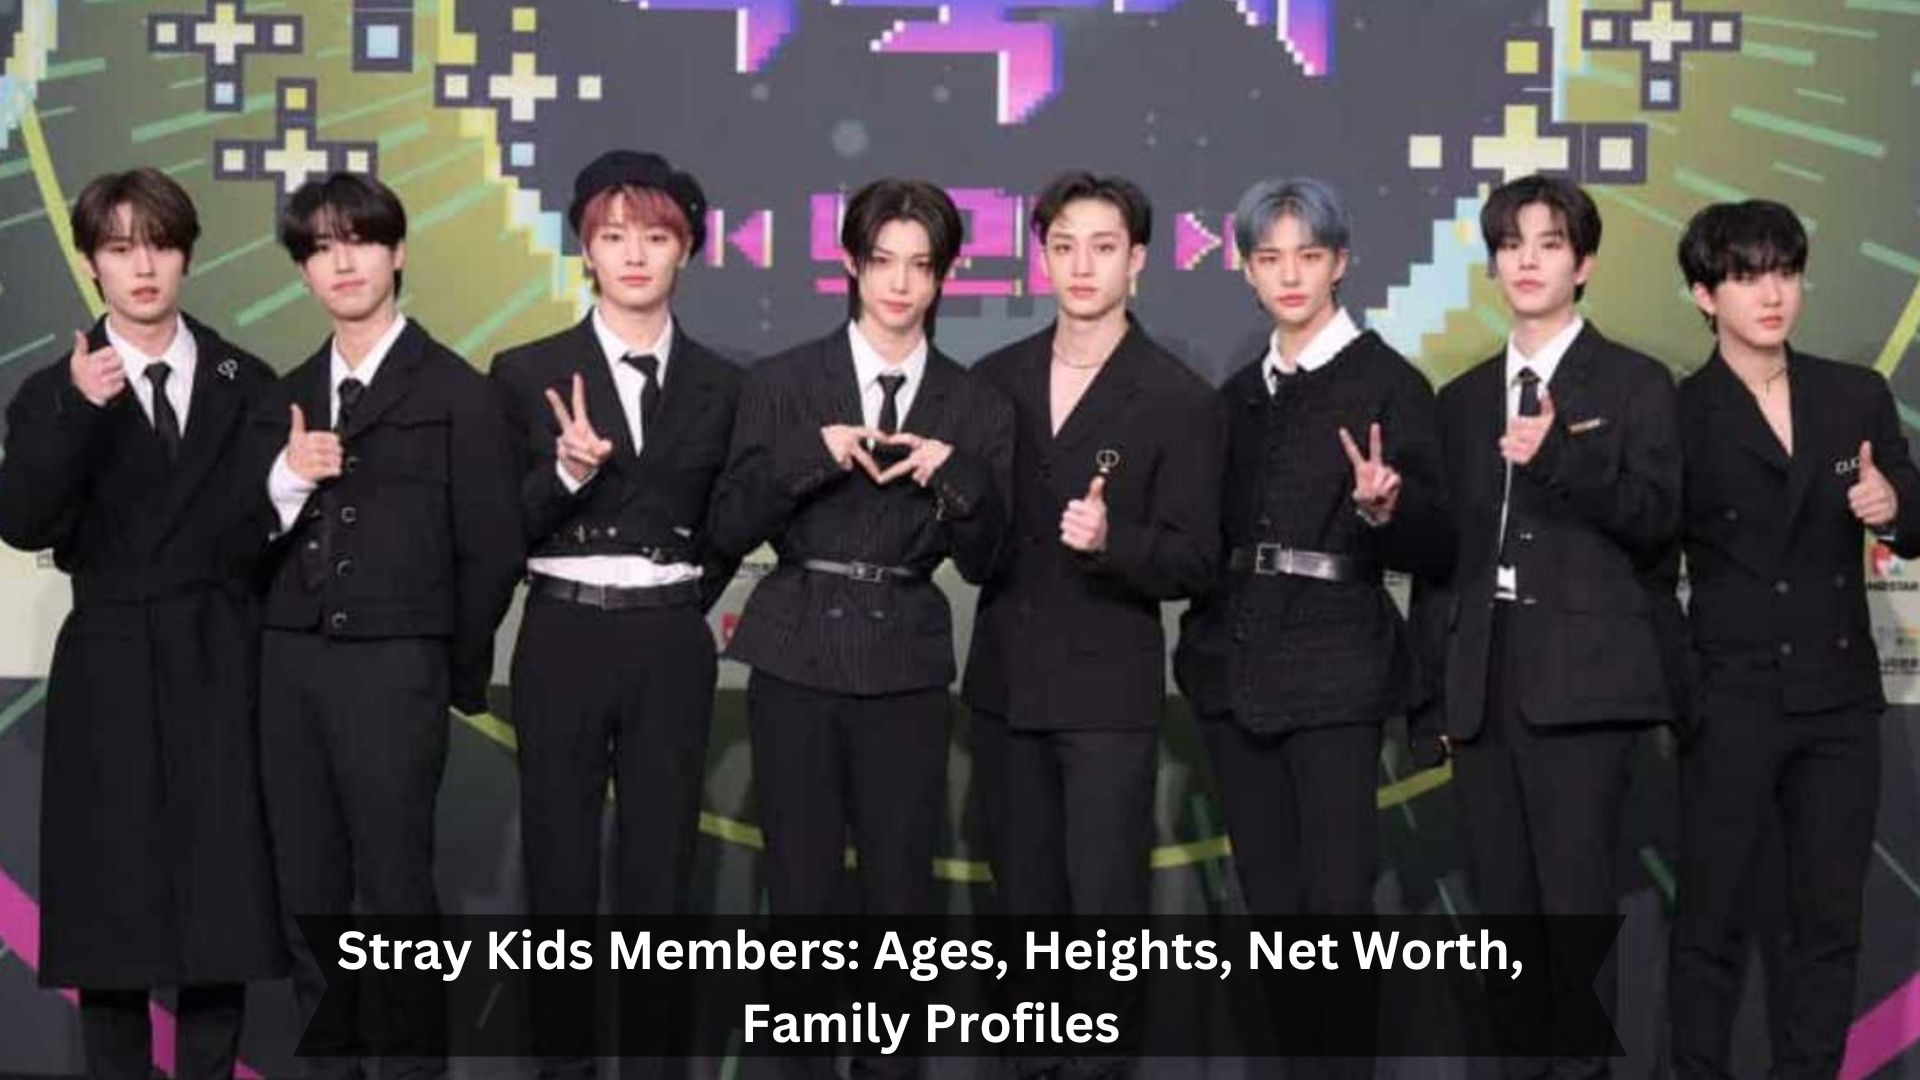 Stray-Kids-Members-Ages-Heights-Net-Worth-Family-Profiles